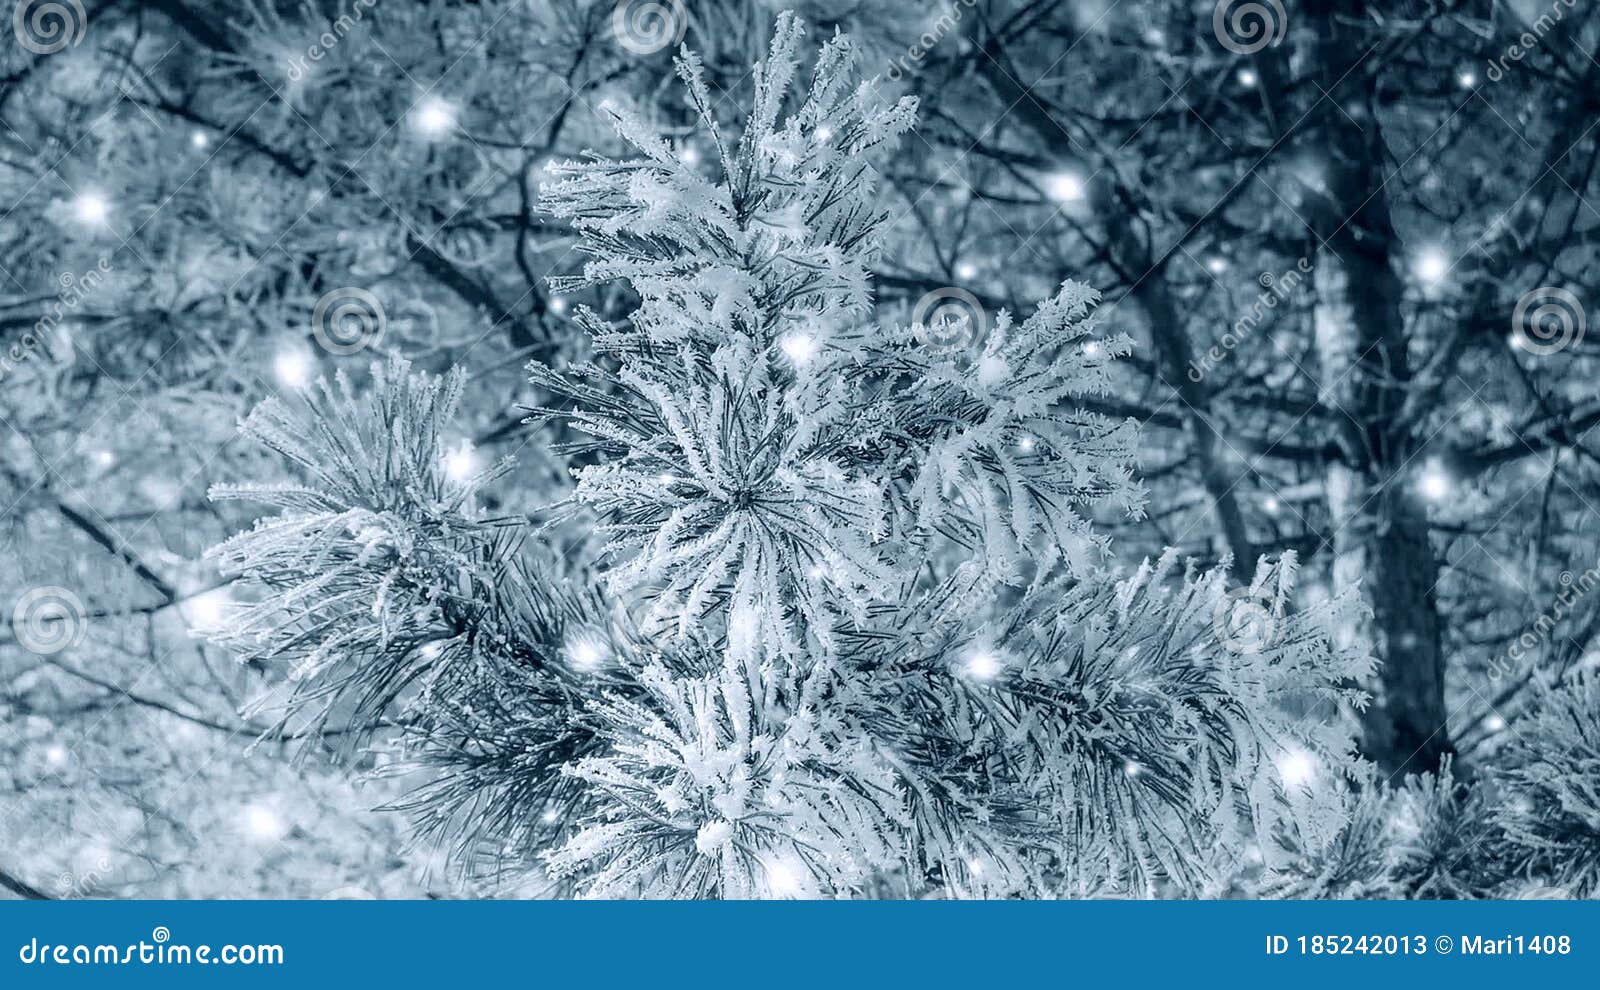 Realistic Snow Falling Loop with transparency Full HD on Make a GIF